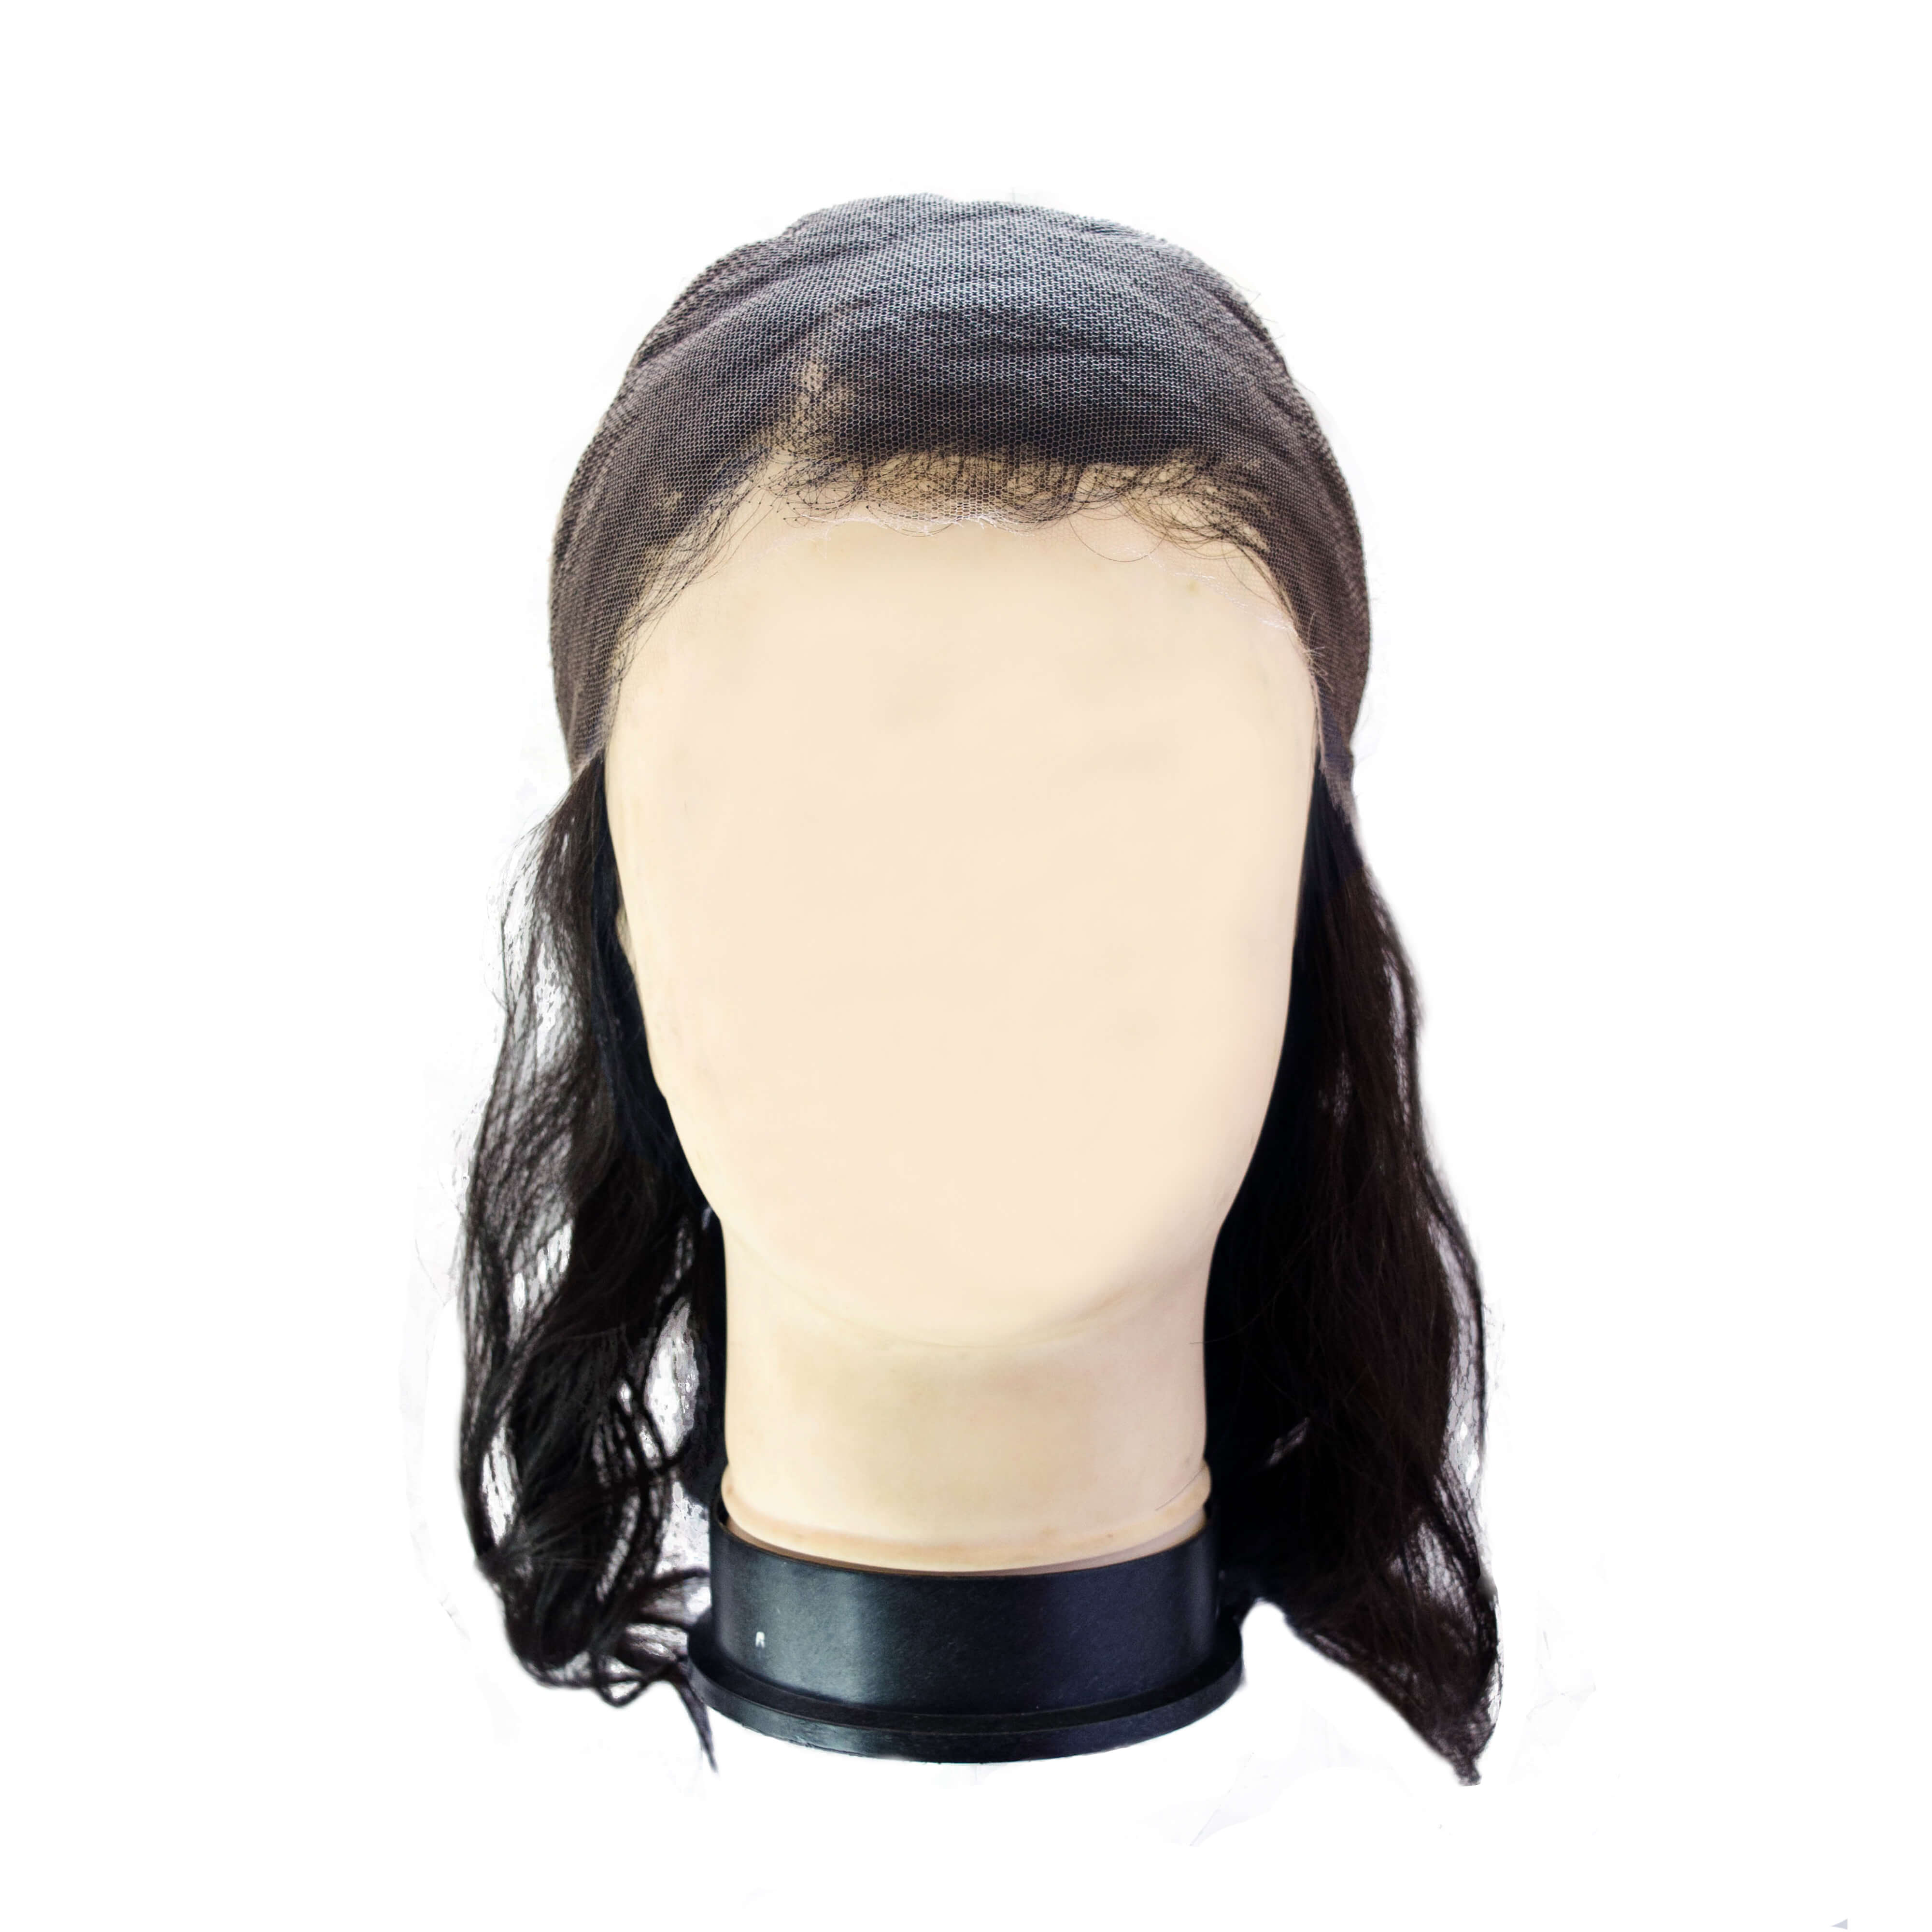 Myfilipinohair Batanes Front Lace Wig Cap Construction Front View